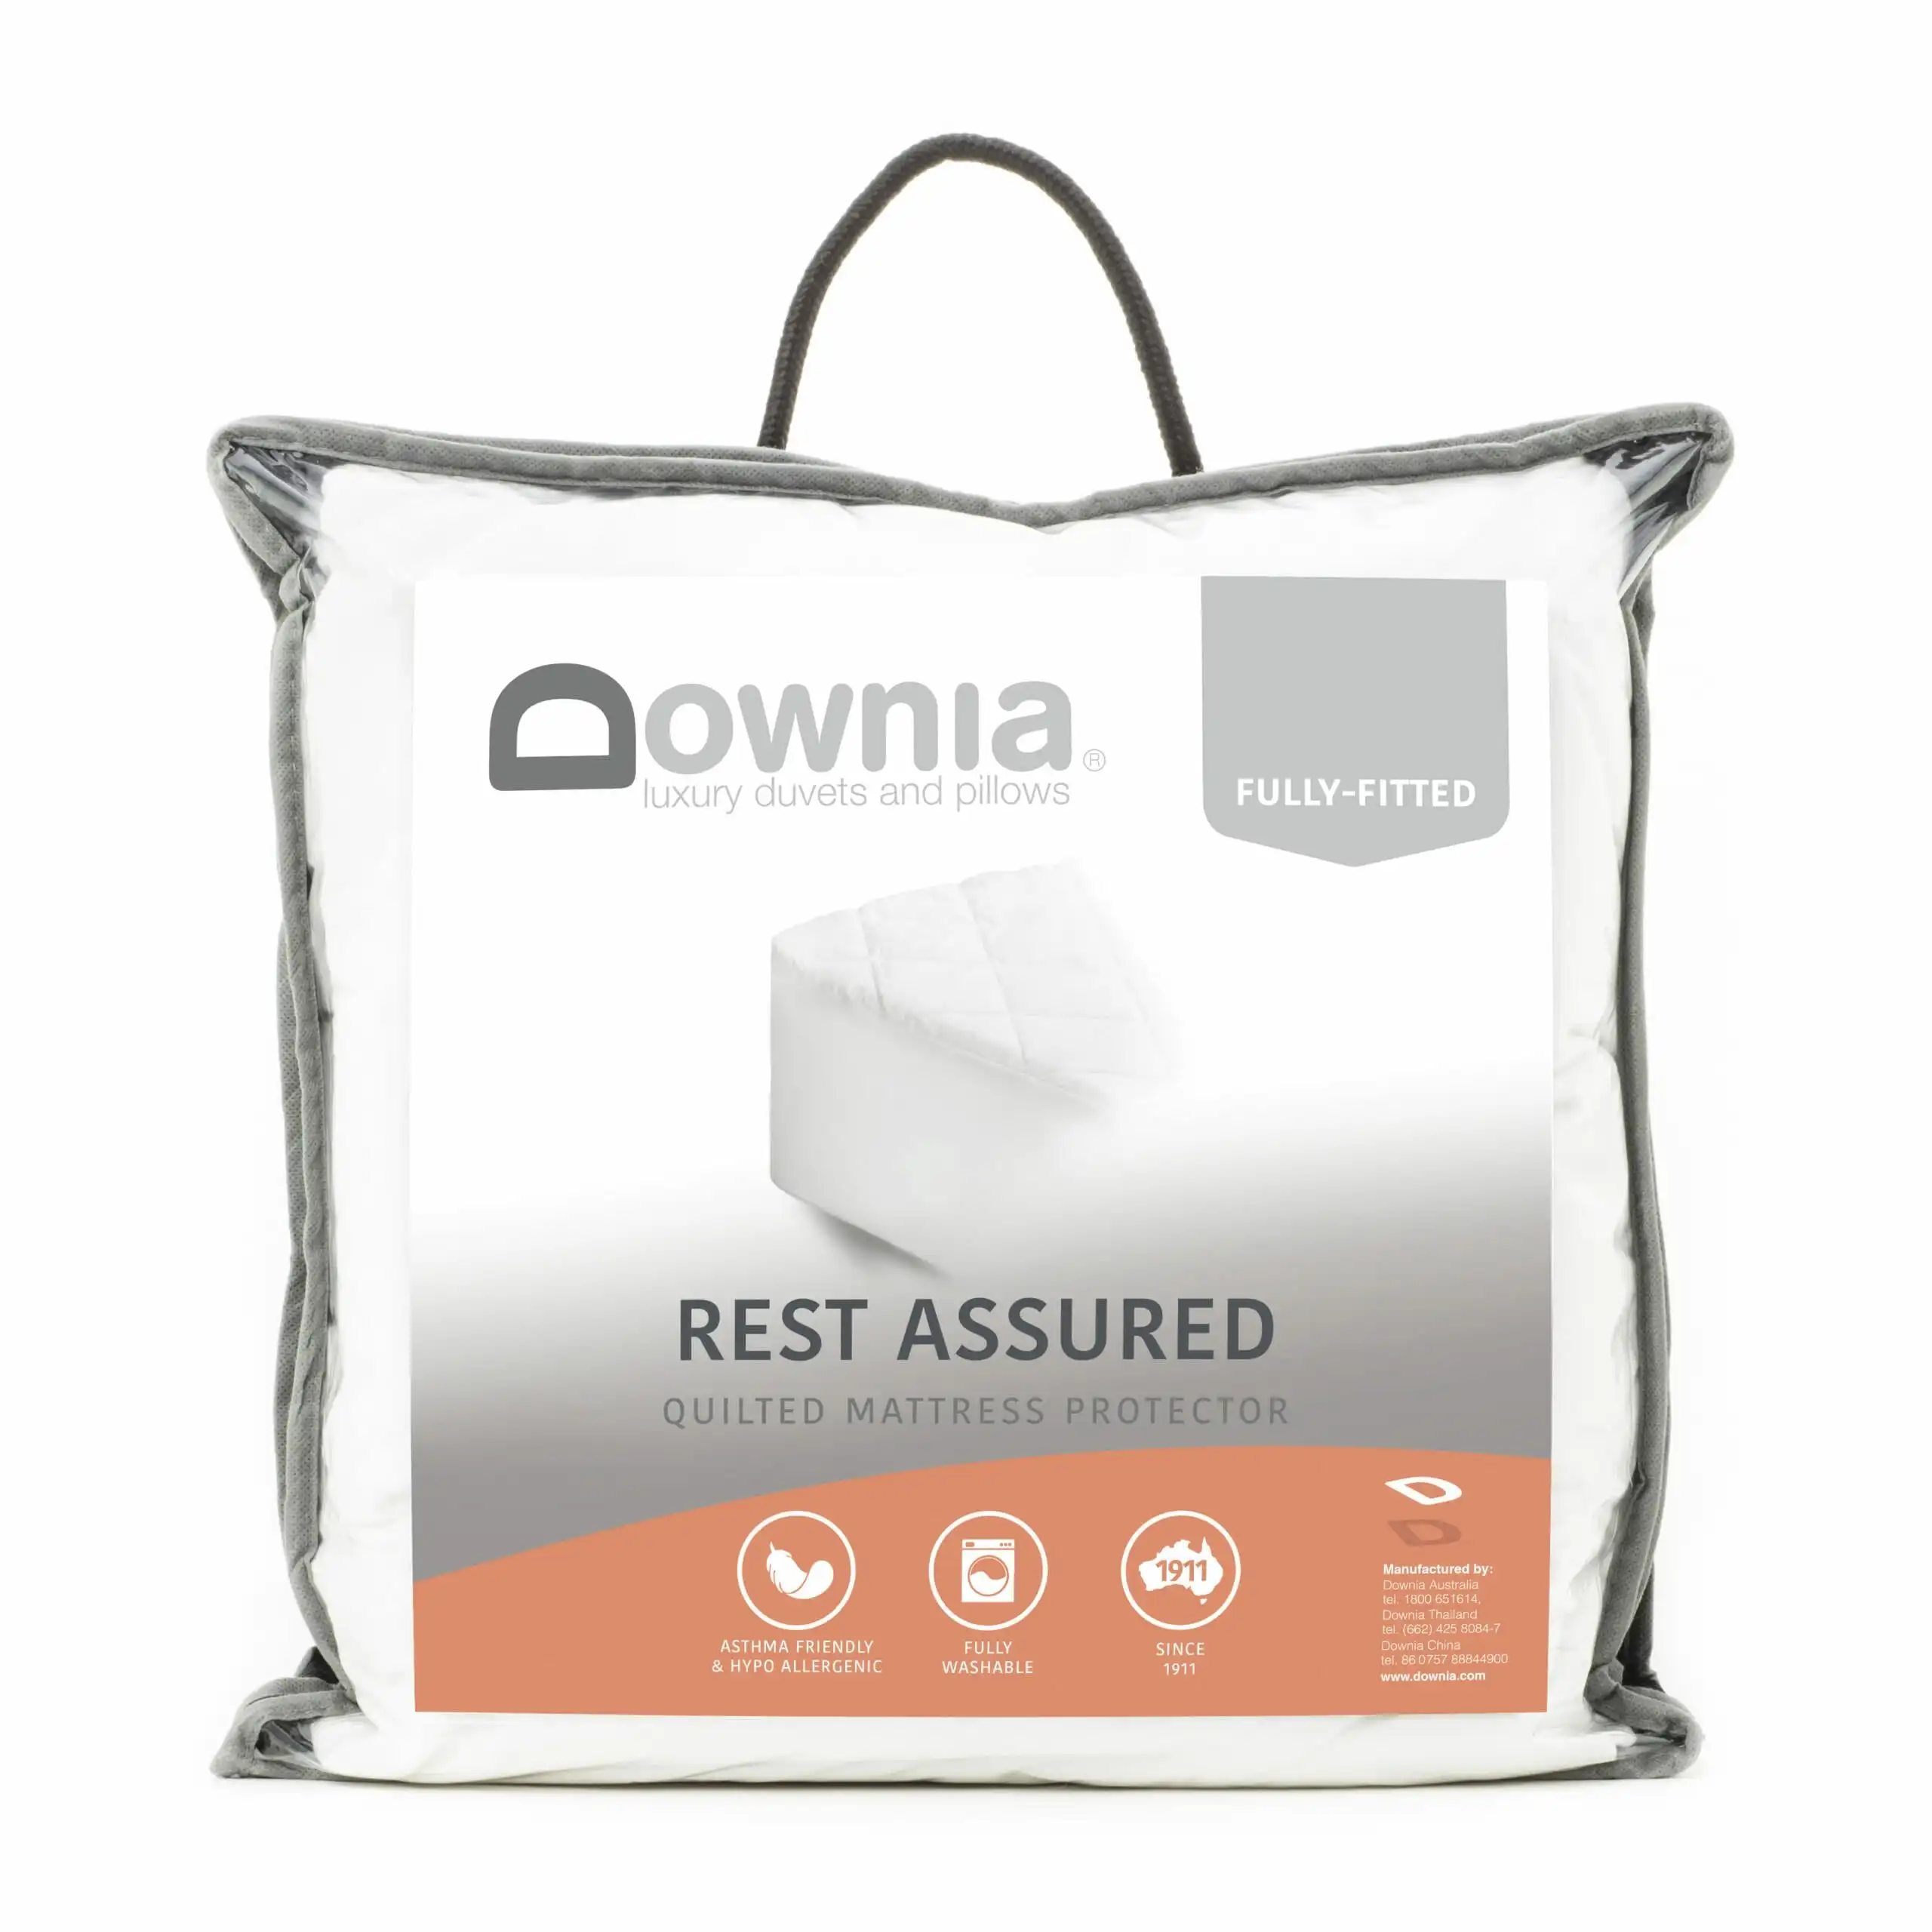 Downia Rest Assured MATTRESS PROTECTOR Polyester Fill